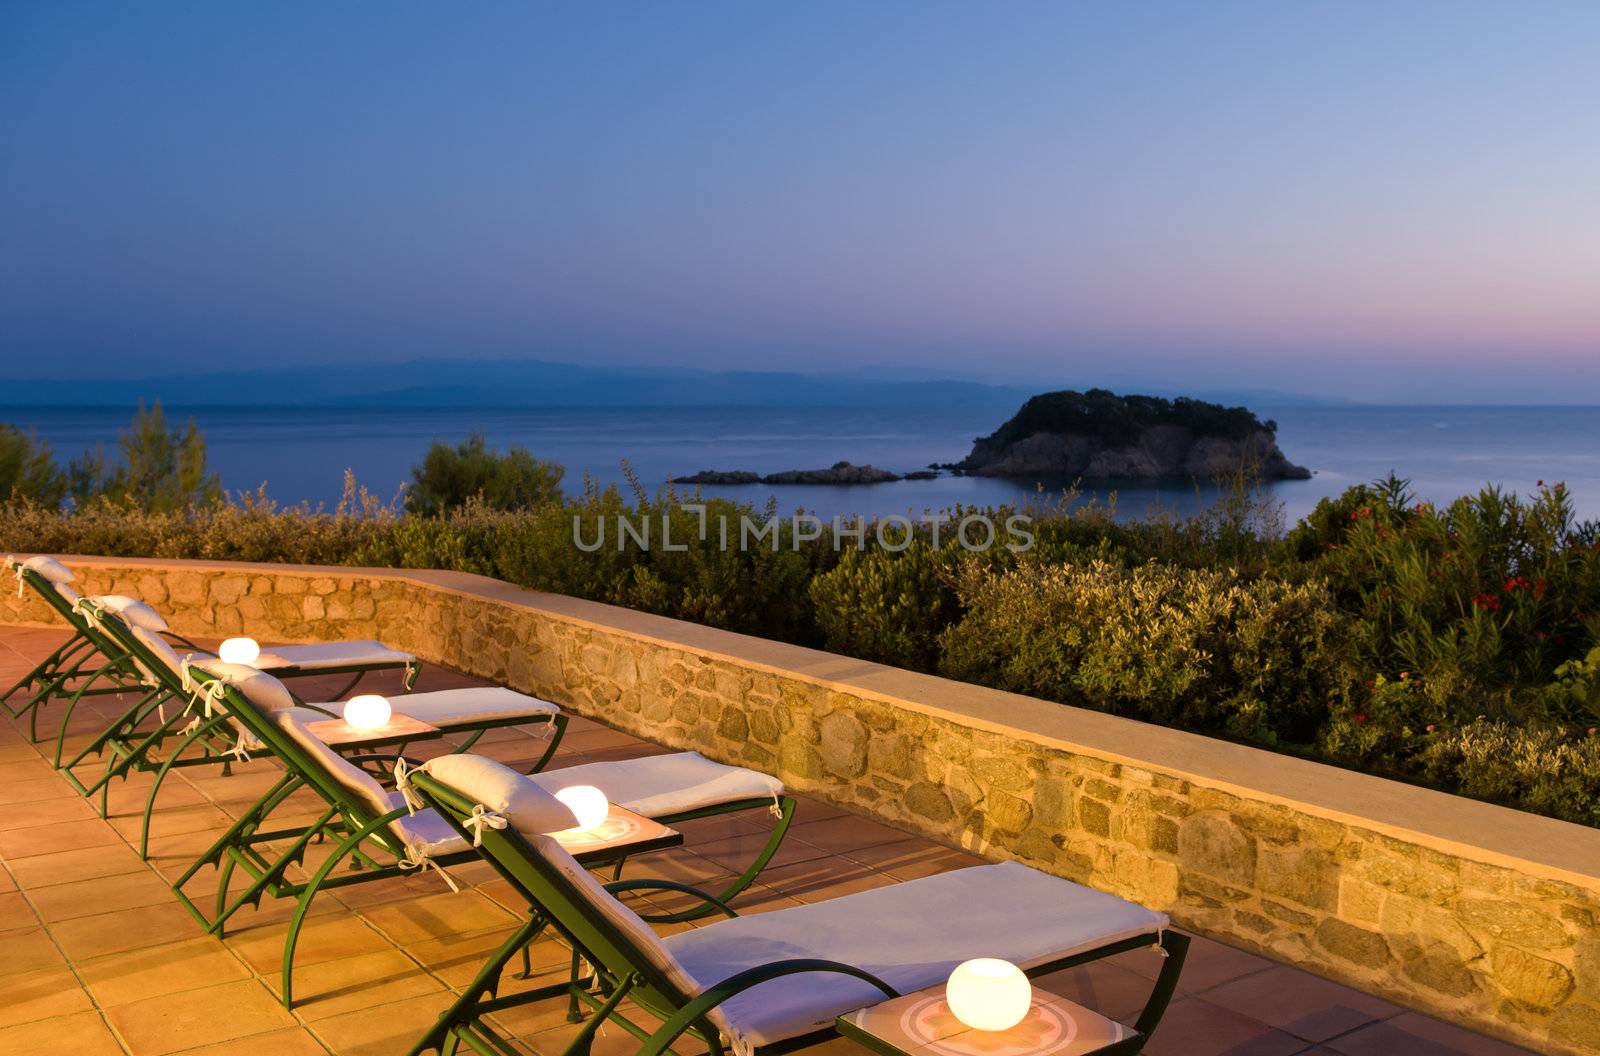 Evening picture of deckchairs on Greek verandah for people to experience the sea view 